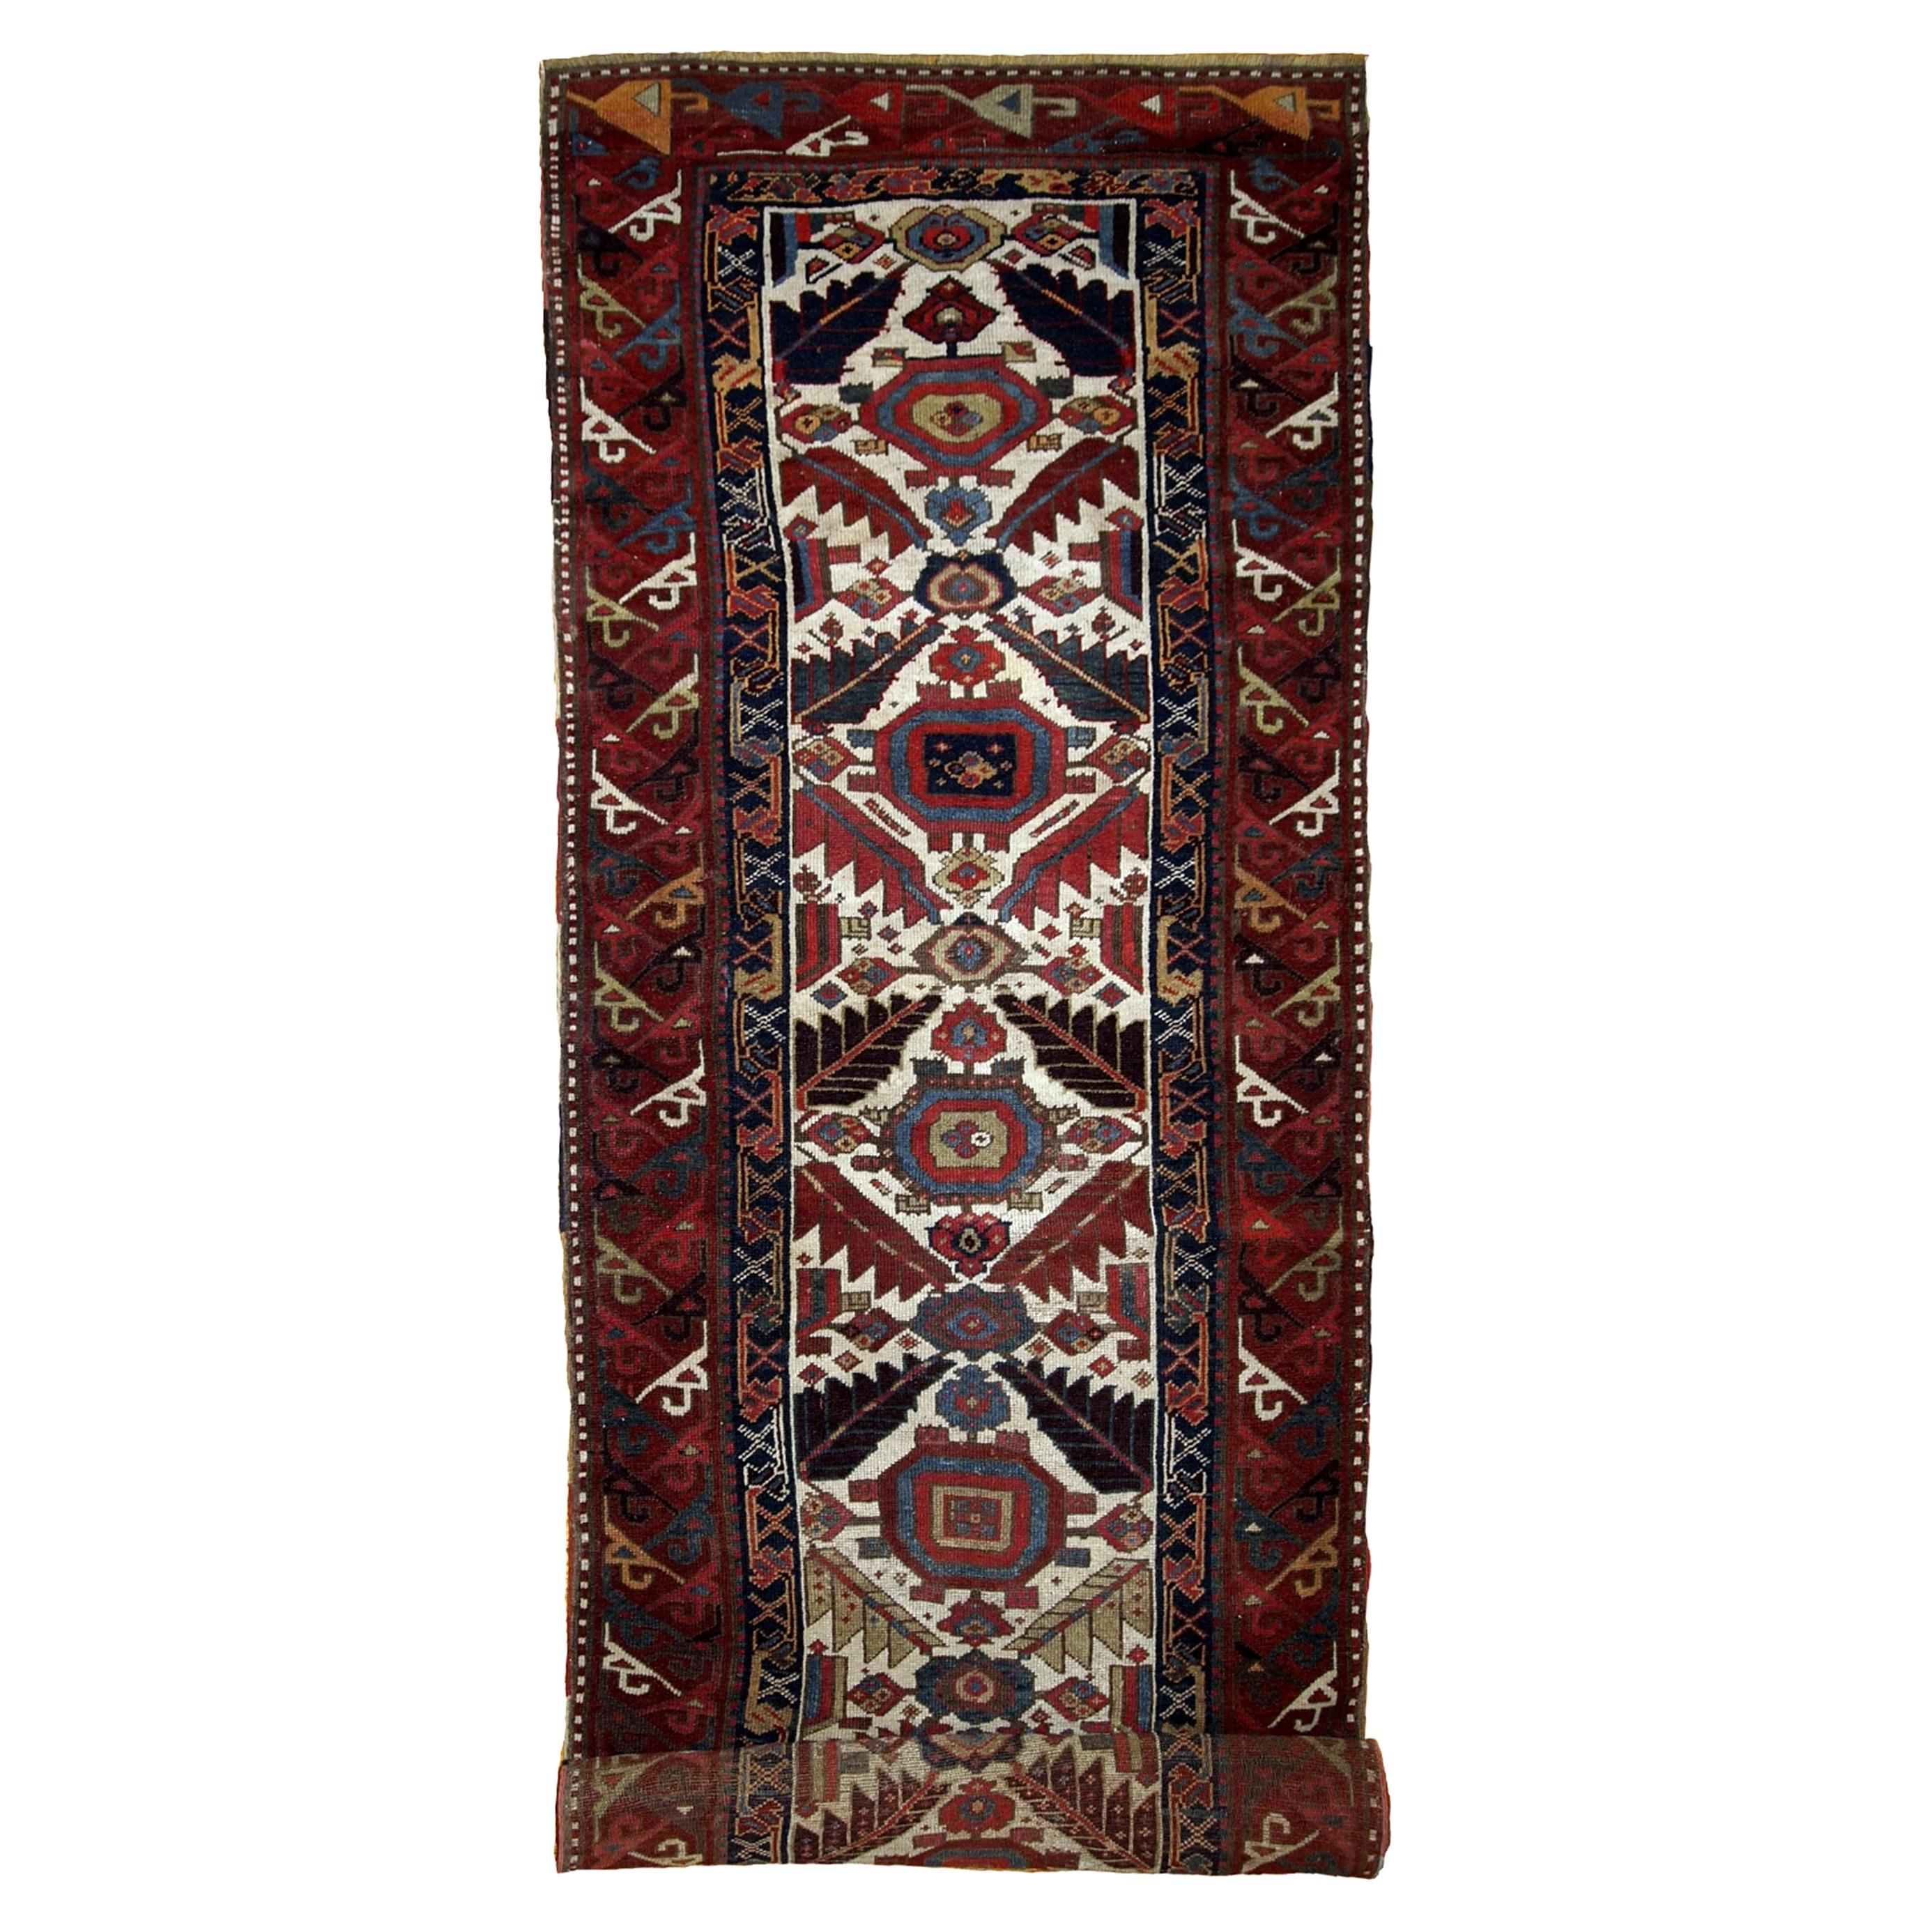 1840s Indian Rugs